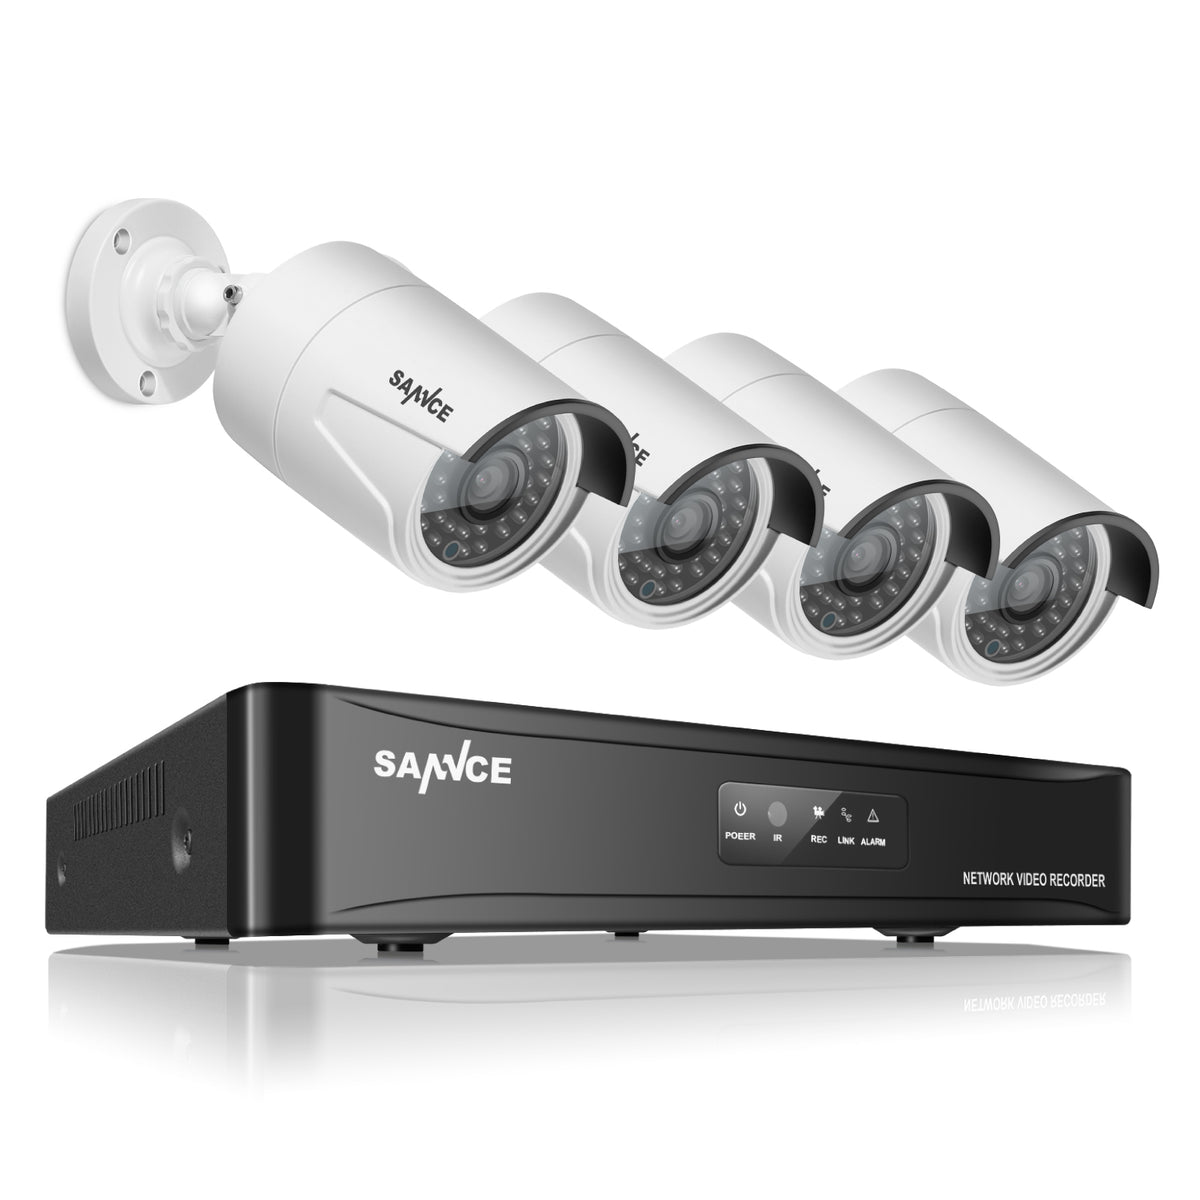 960P PoE Security Camera System, 4-Channel Wired PoE NVR with 4 Bullet CCTV IP Cameras, Motion Detection, IP66 Weatherproof